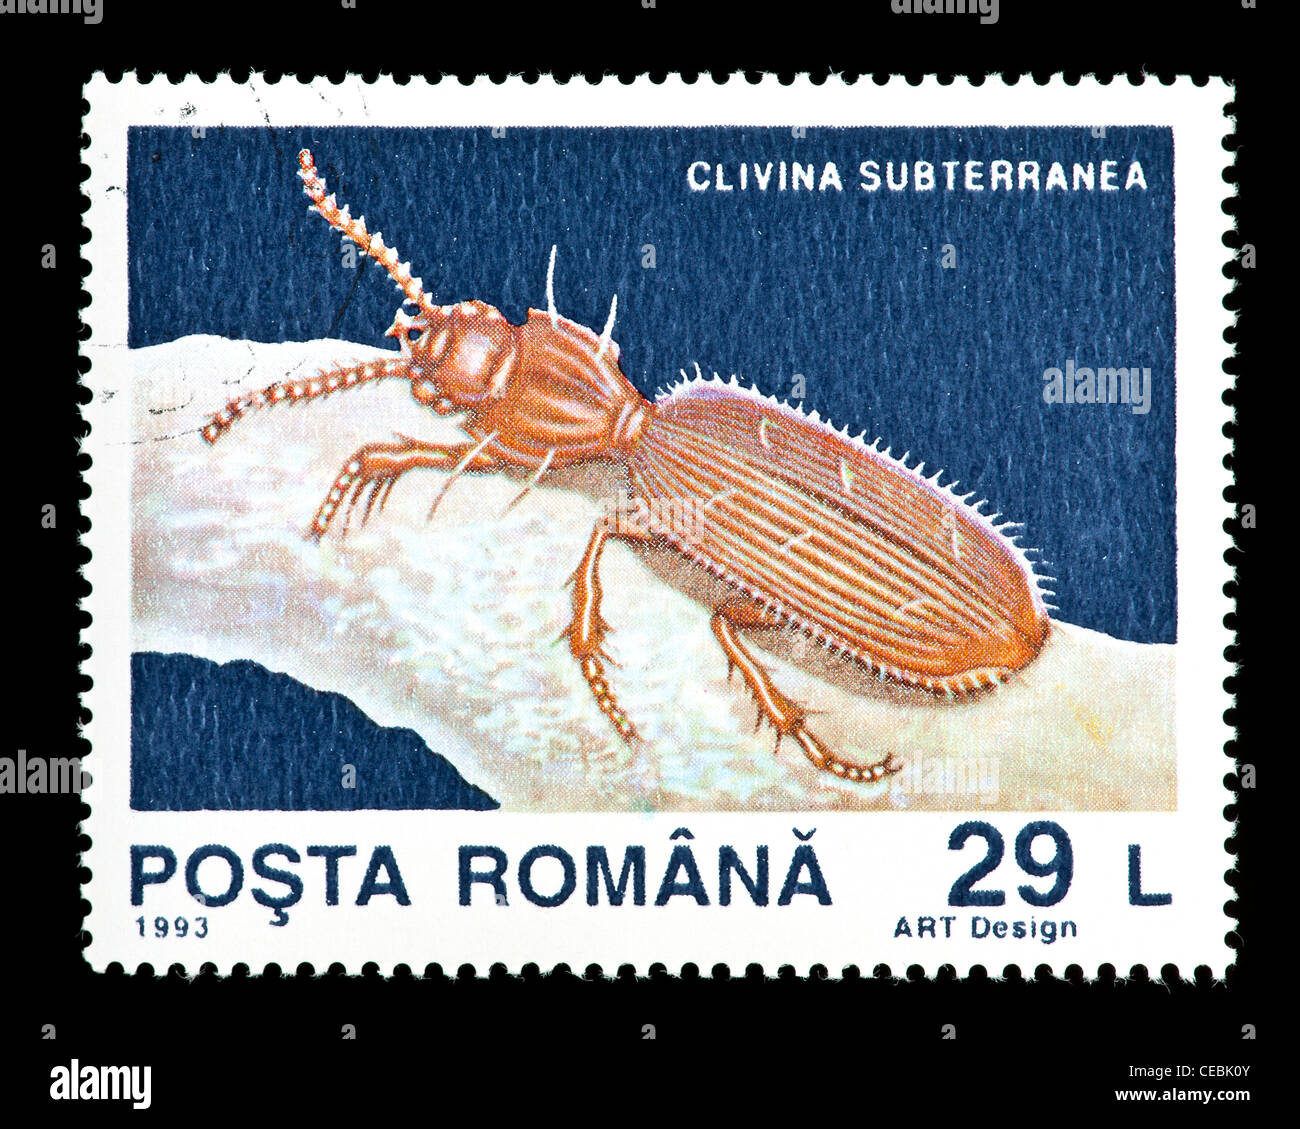 Postage stamp from Romania  depicting a ground beetle (Clivina subterranea) Stock Photo